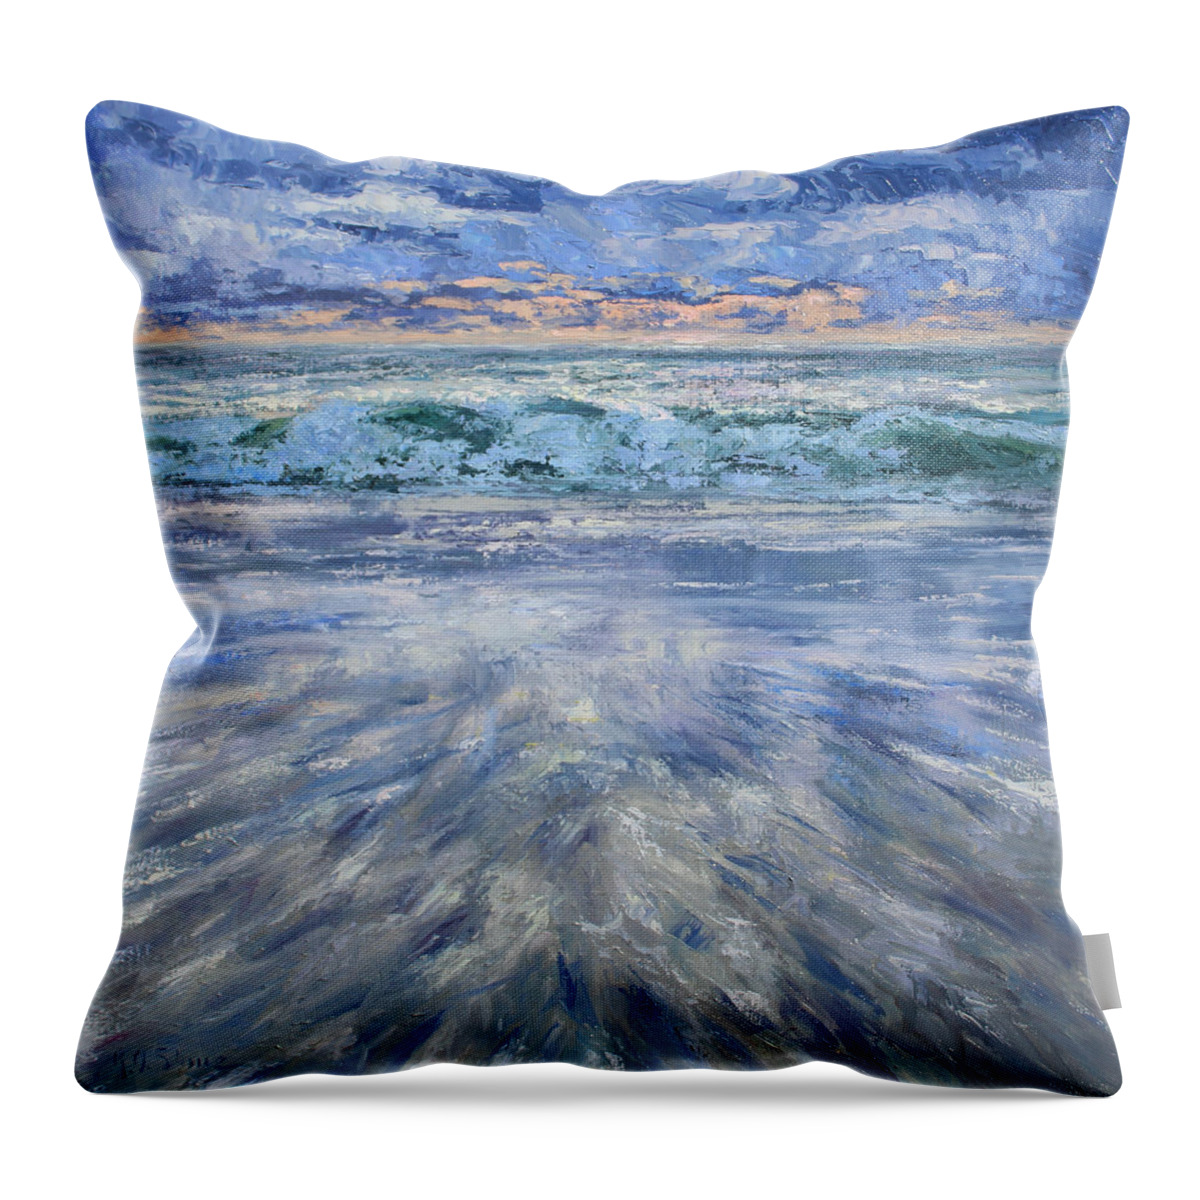 Seascape Throw Pillow featuring the painting Seaside Dreams by Kristen Olson Stone